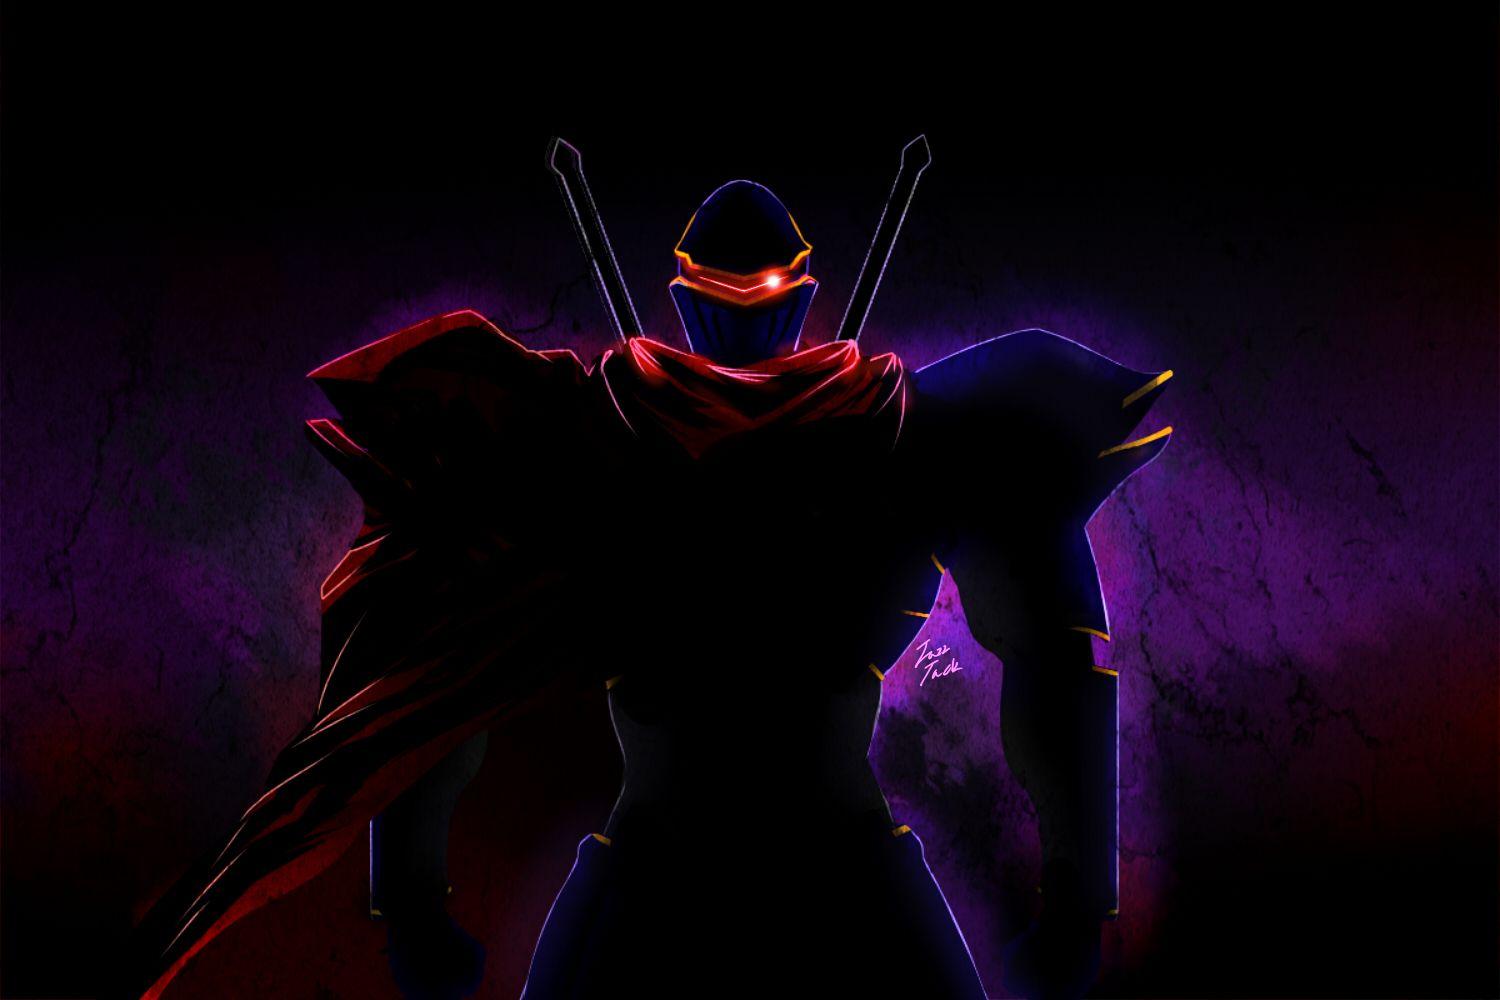 Anime Overlord Ainz Ooal Gown Ovelrord Wallpaper. Overlord, Arte